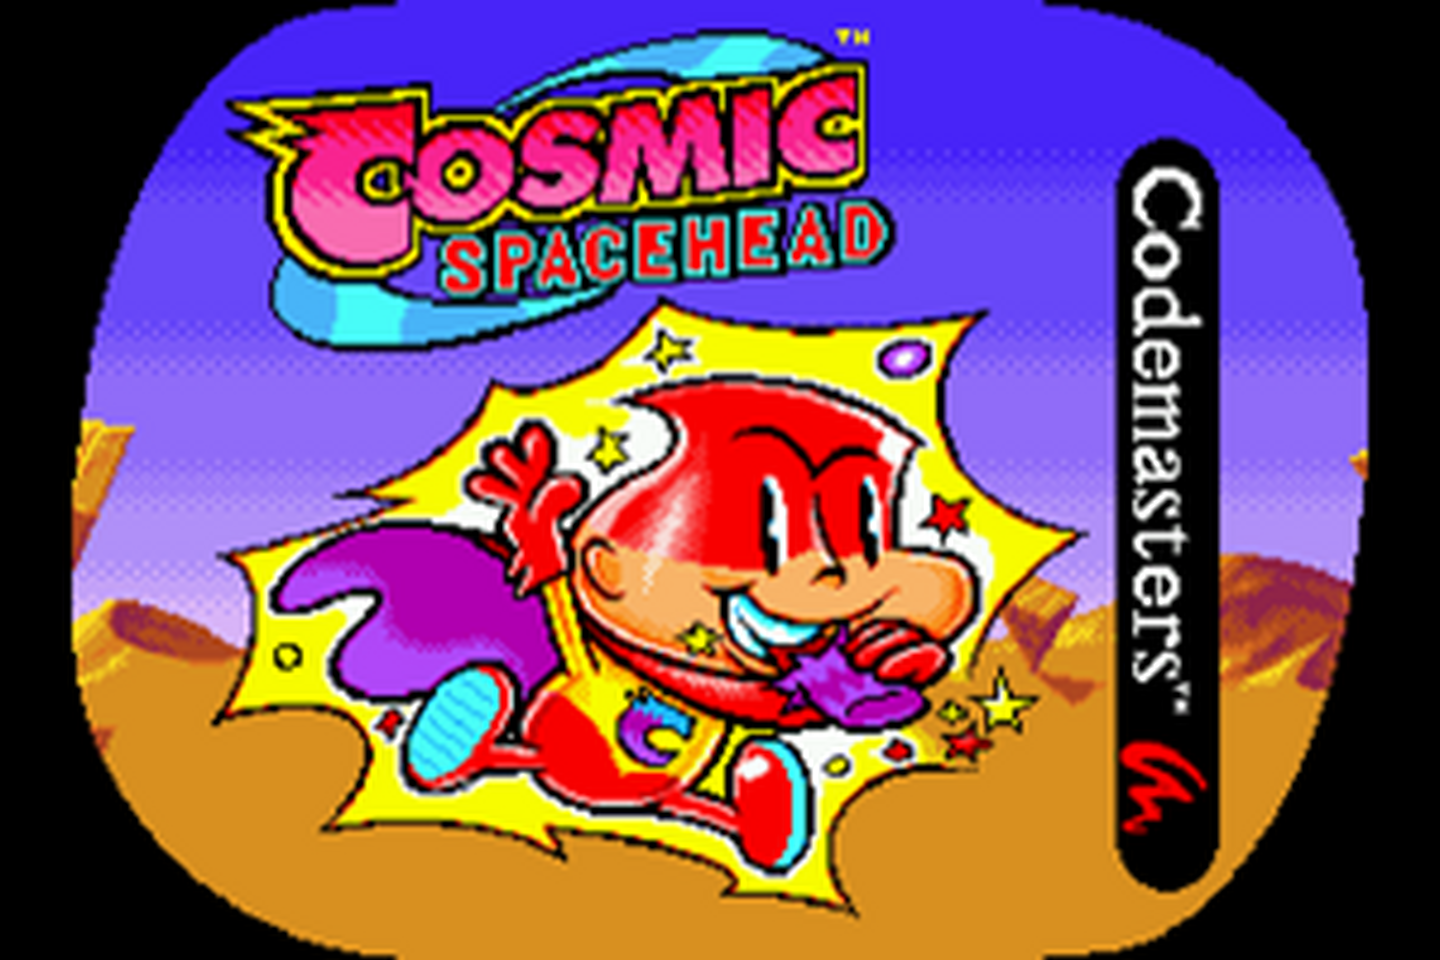 SMD GameBase Cosmic_Spacehead Codemasters_Software_Company_Limited,_The 1993